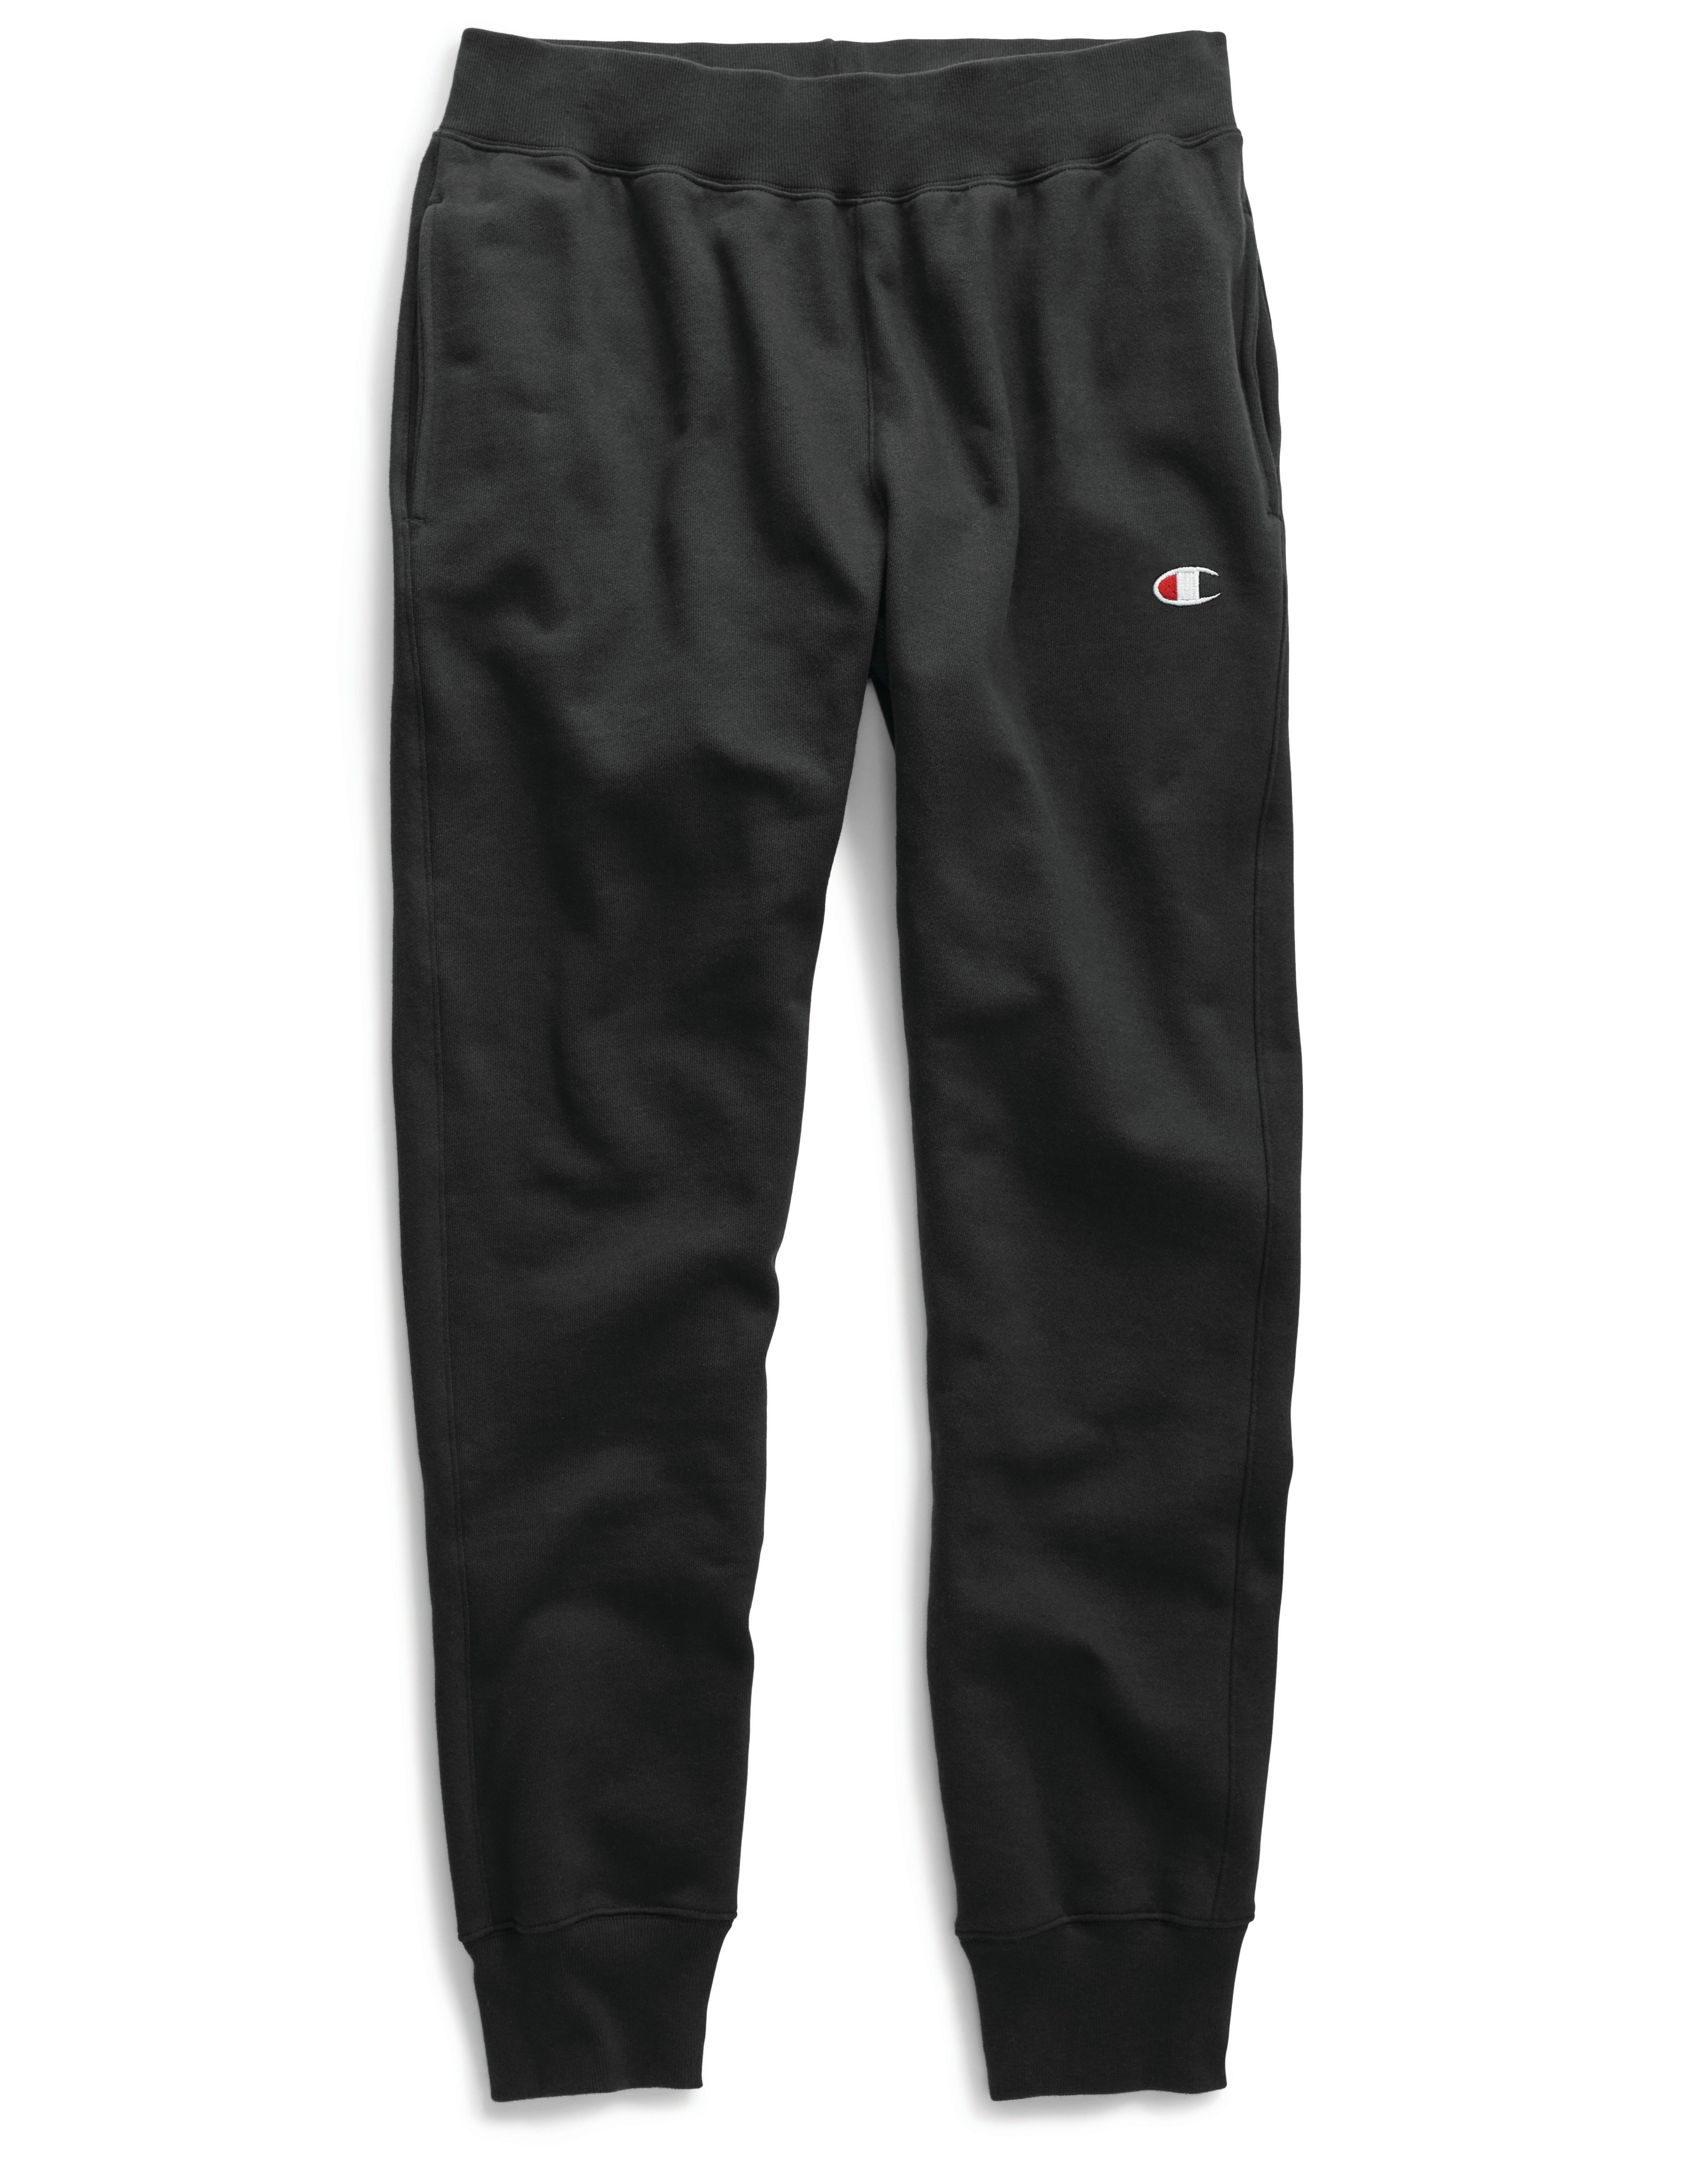 Men's Powerblend Fleece Relaxed Bottom Pant from Champion